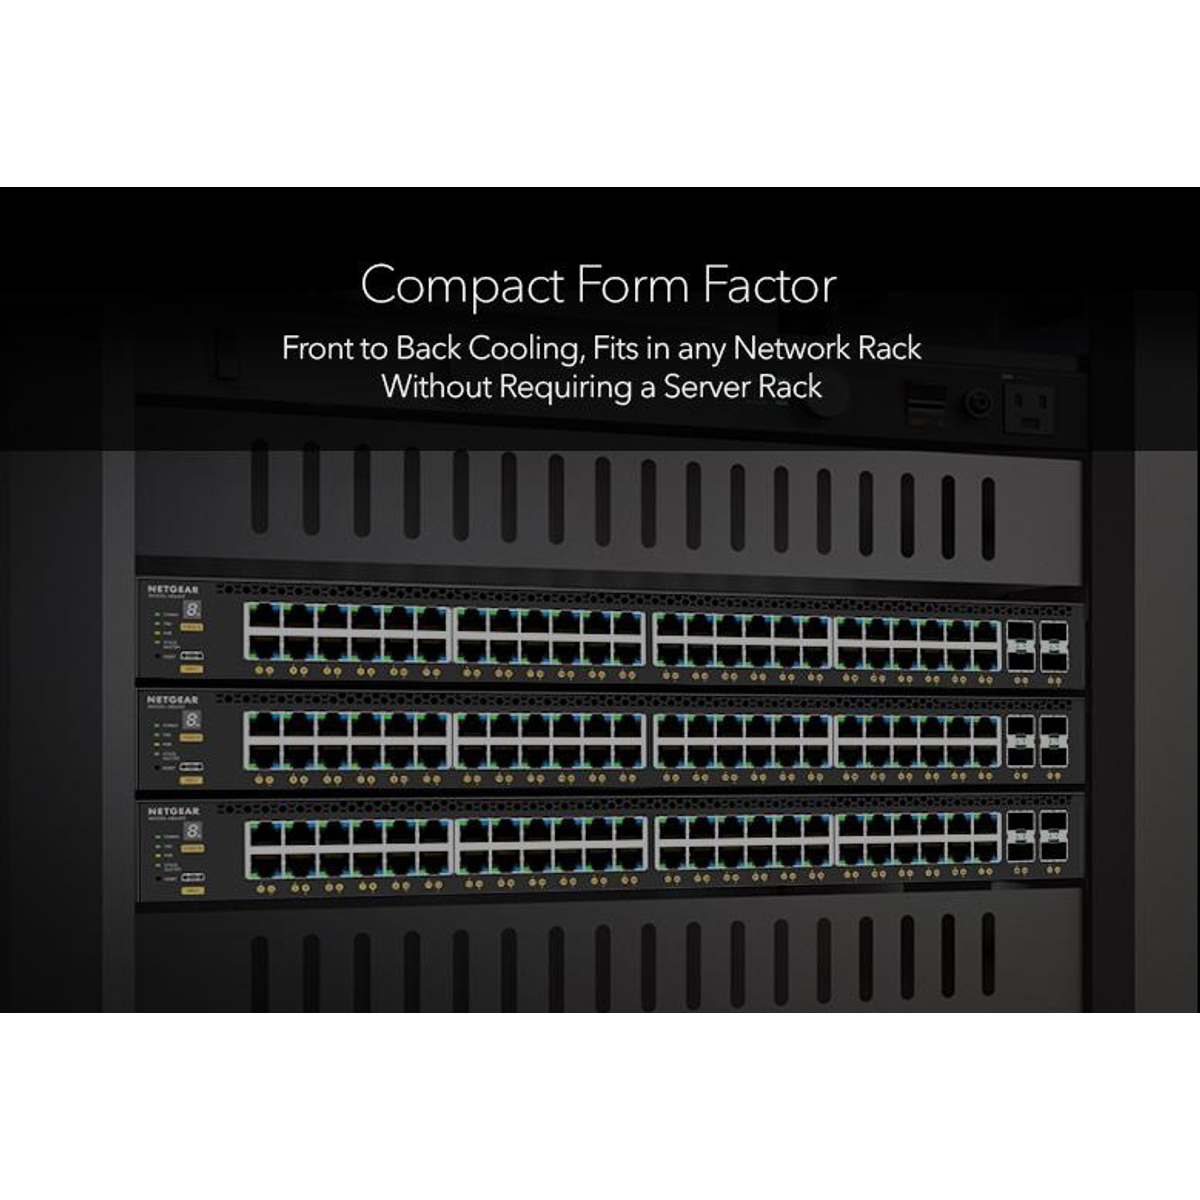 M4350-12X12F Fully Managed Switch